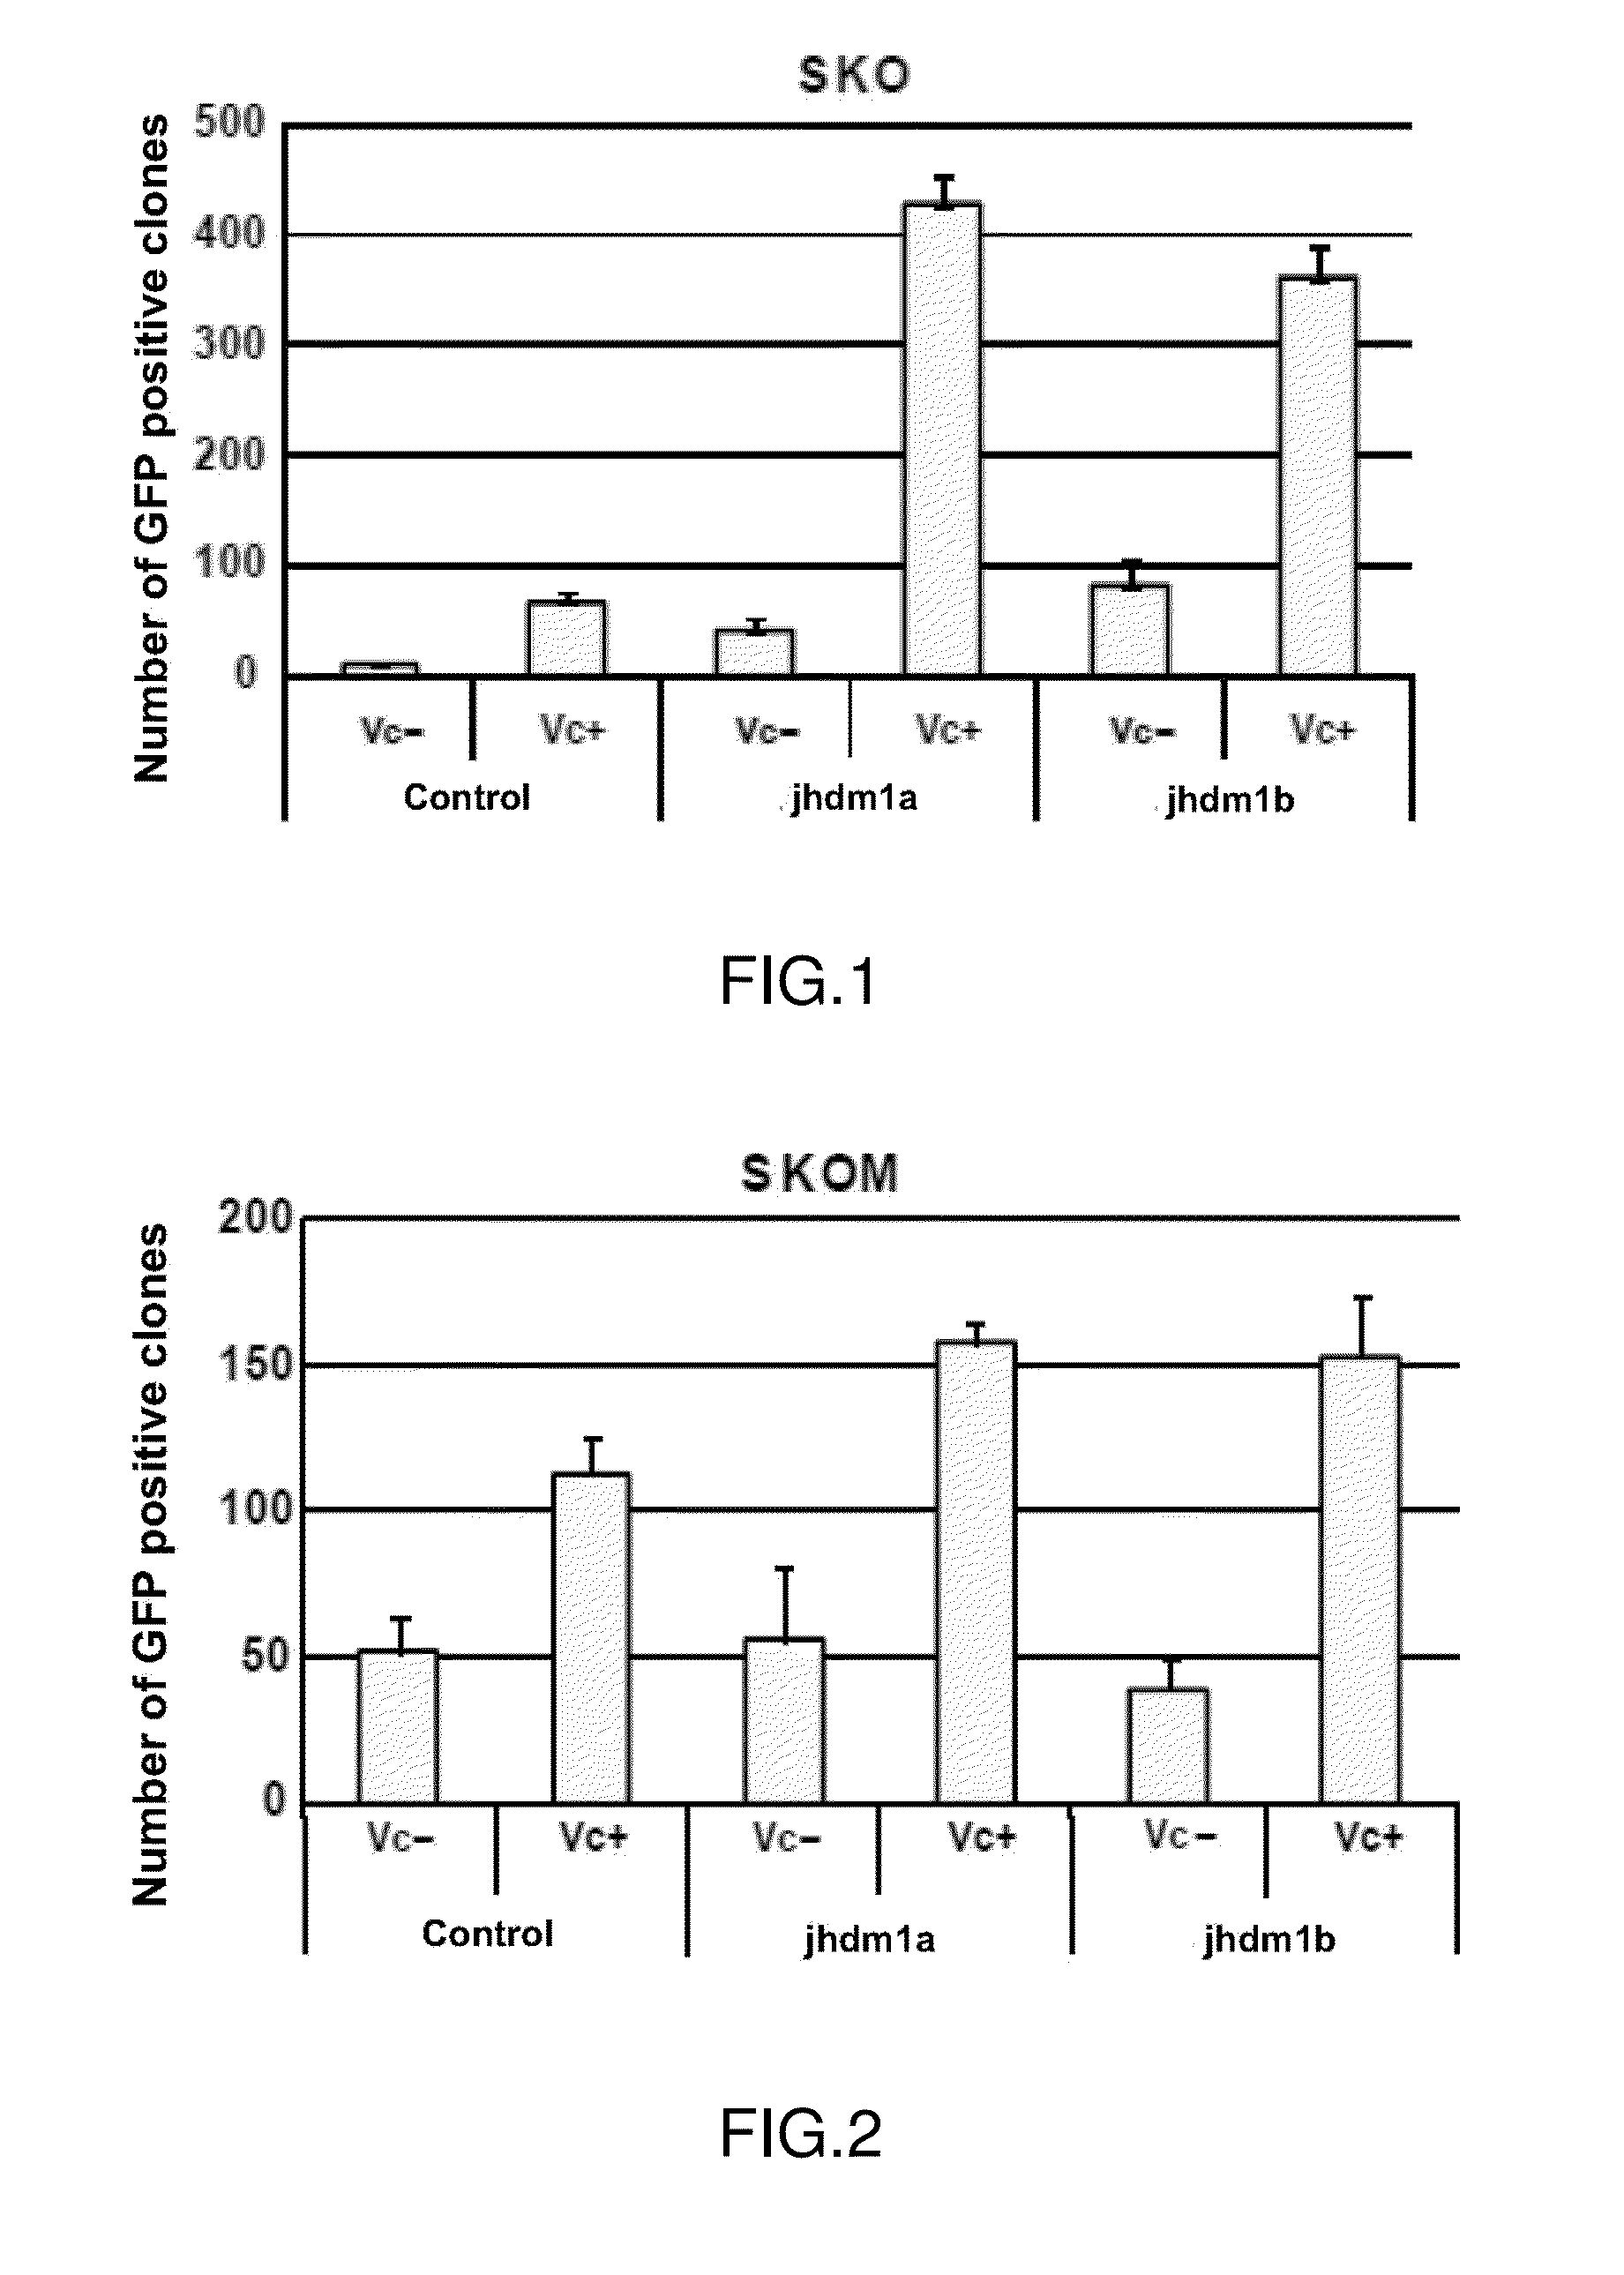 Method for increasing the efficiency of inducing pluripotent stem cells